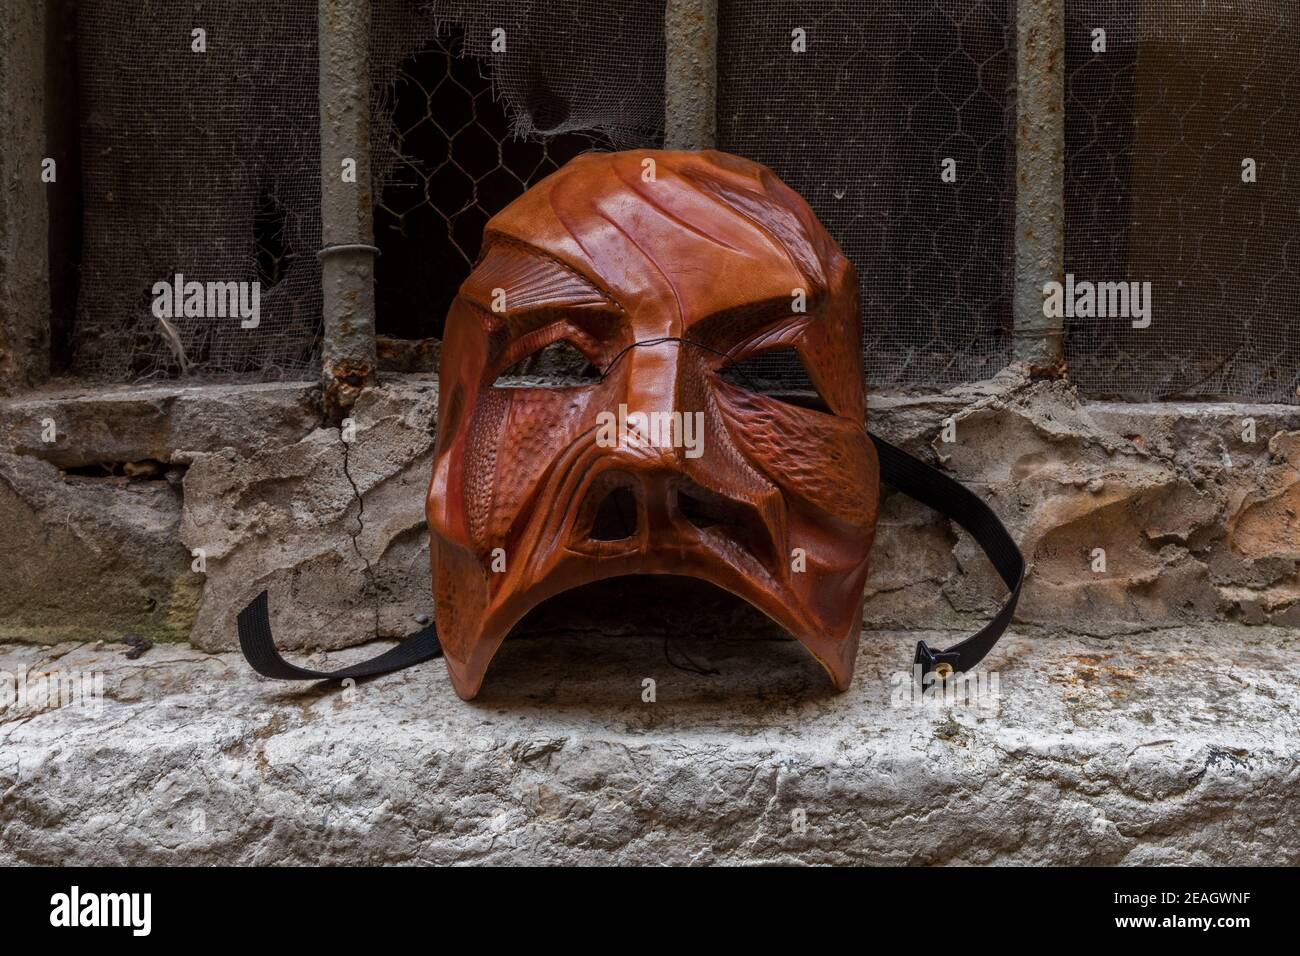 Leather theatre mask made by artist Carlo Setti from Venice. Mask portrays an elemental stone warrior with a rugged and scarred face. Stock Photo